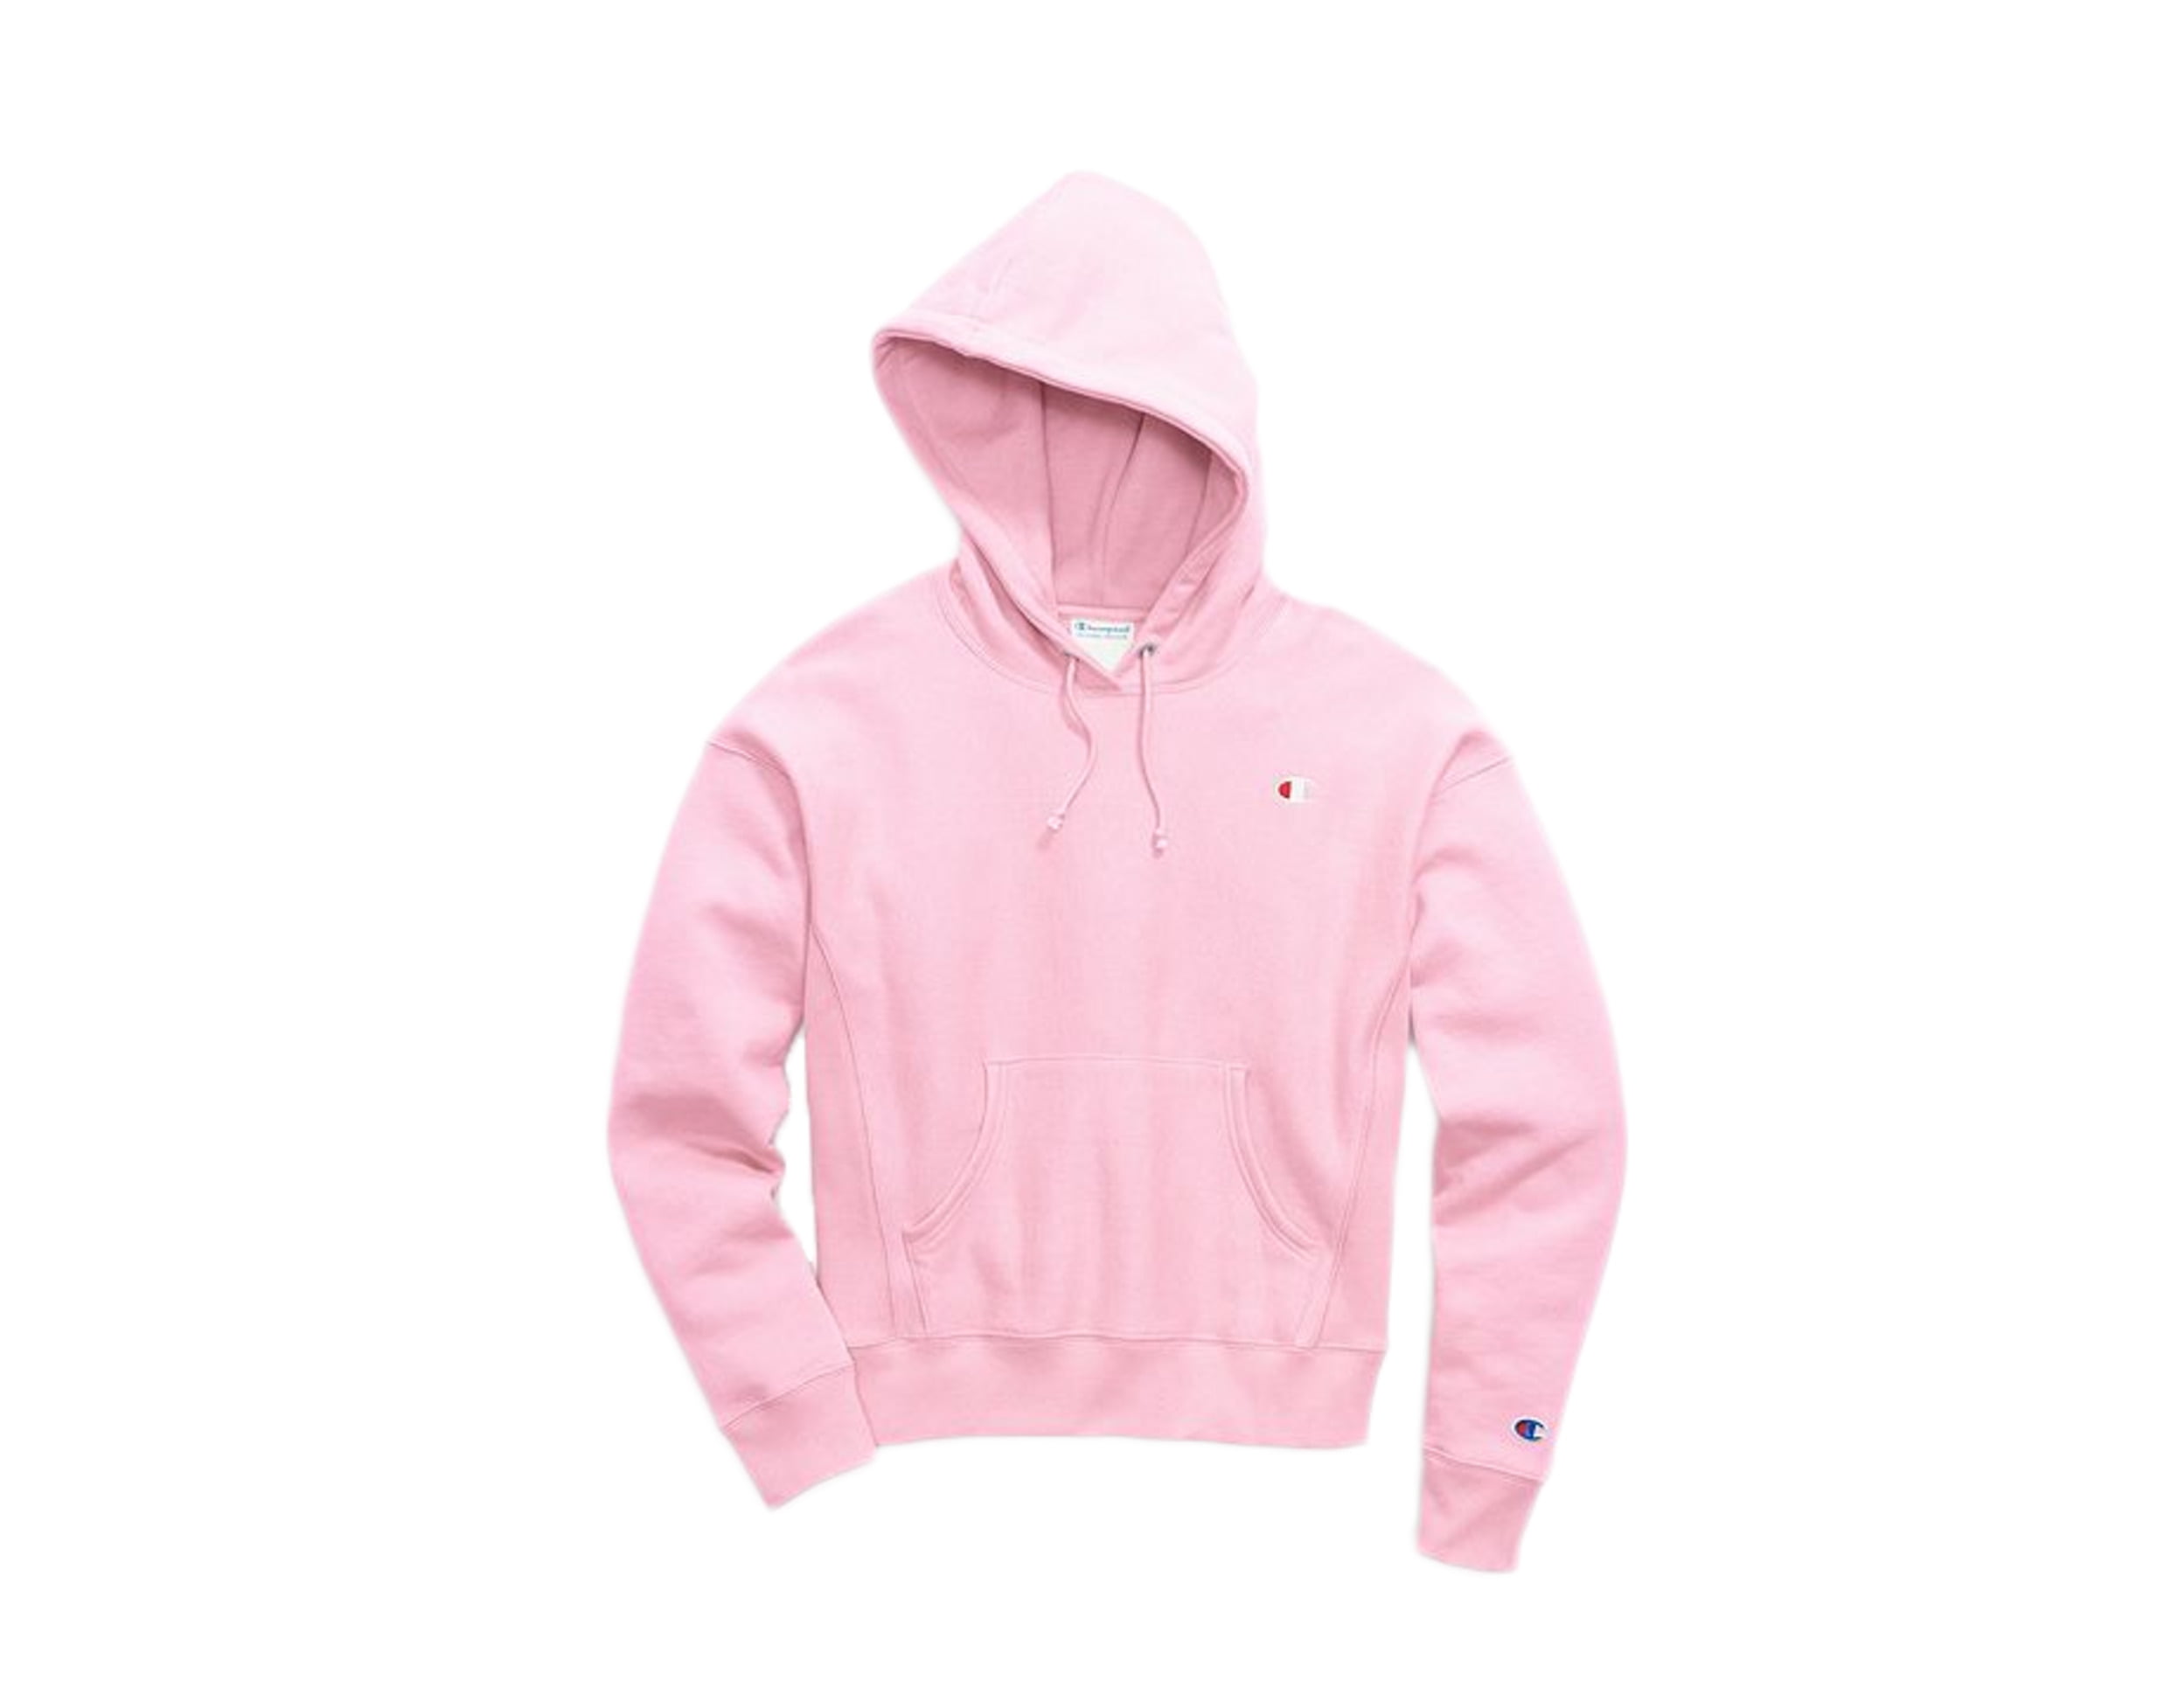 champion hoodie in pink